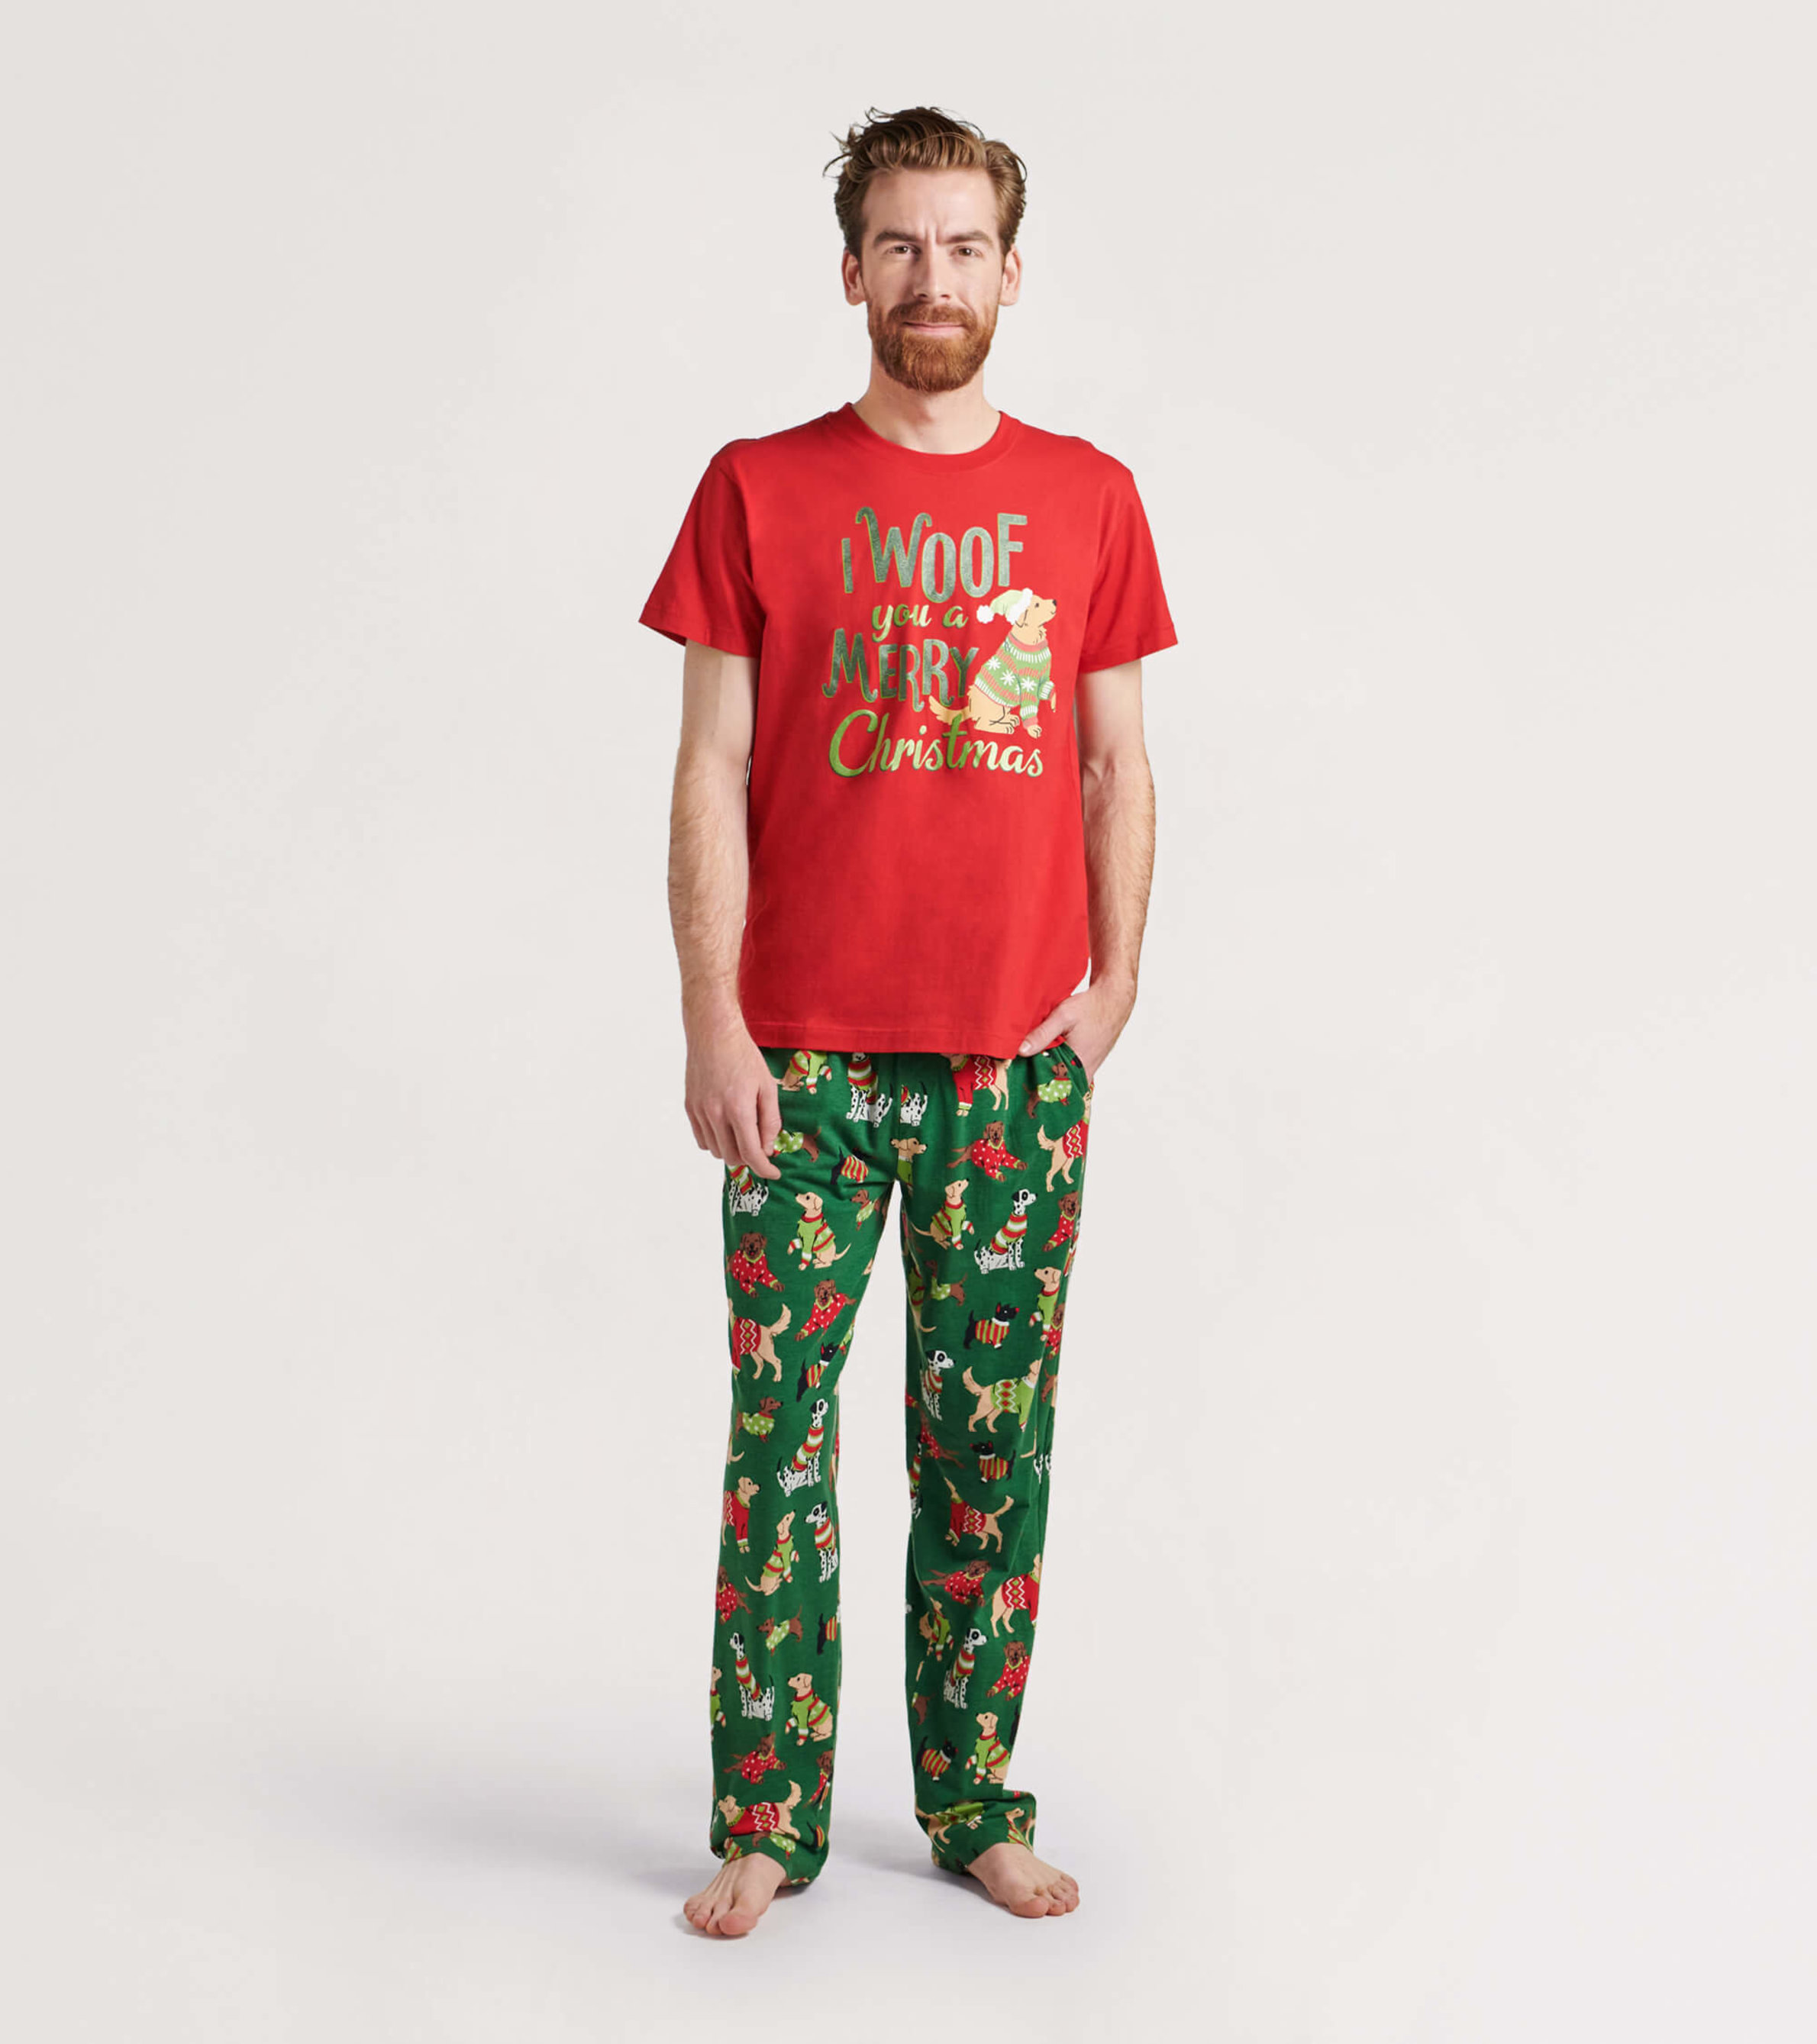 Woofing Christmas Men's Tee and Pants Pajama Separates - Little Blue House  US